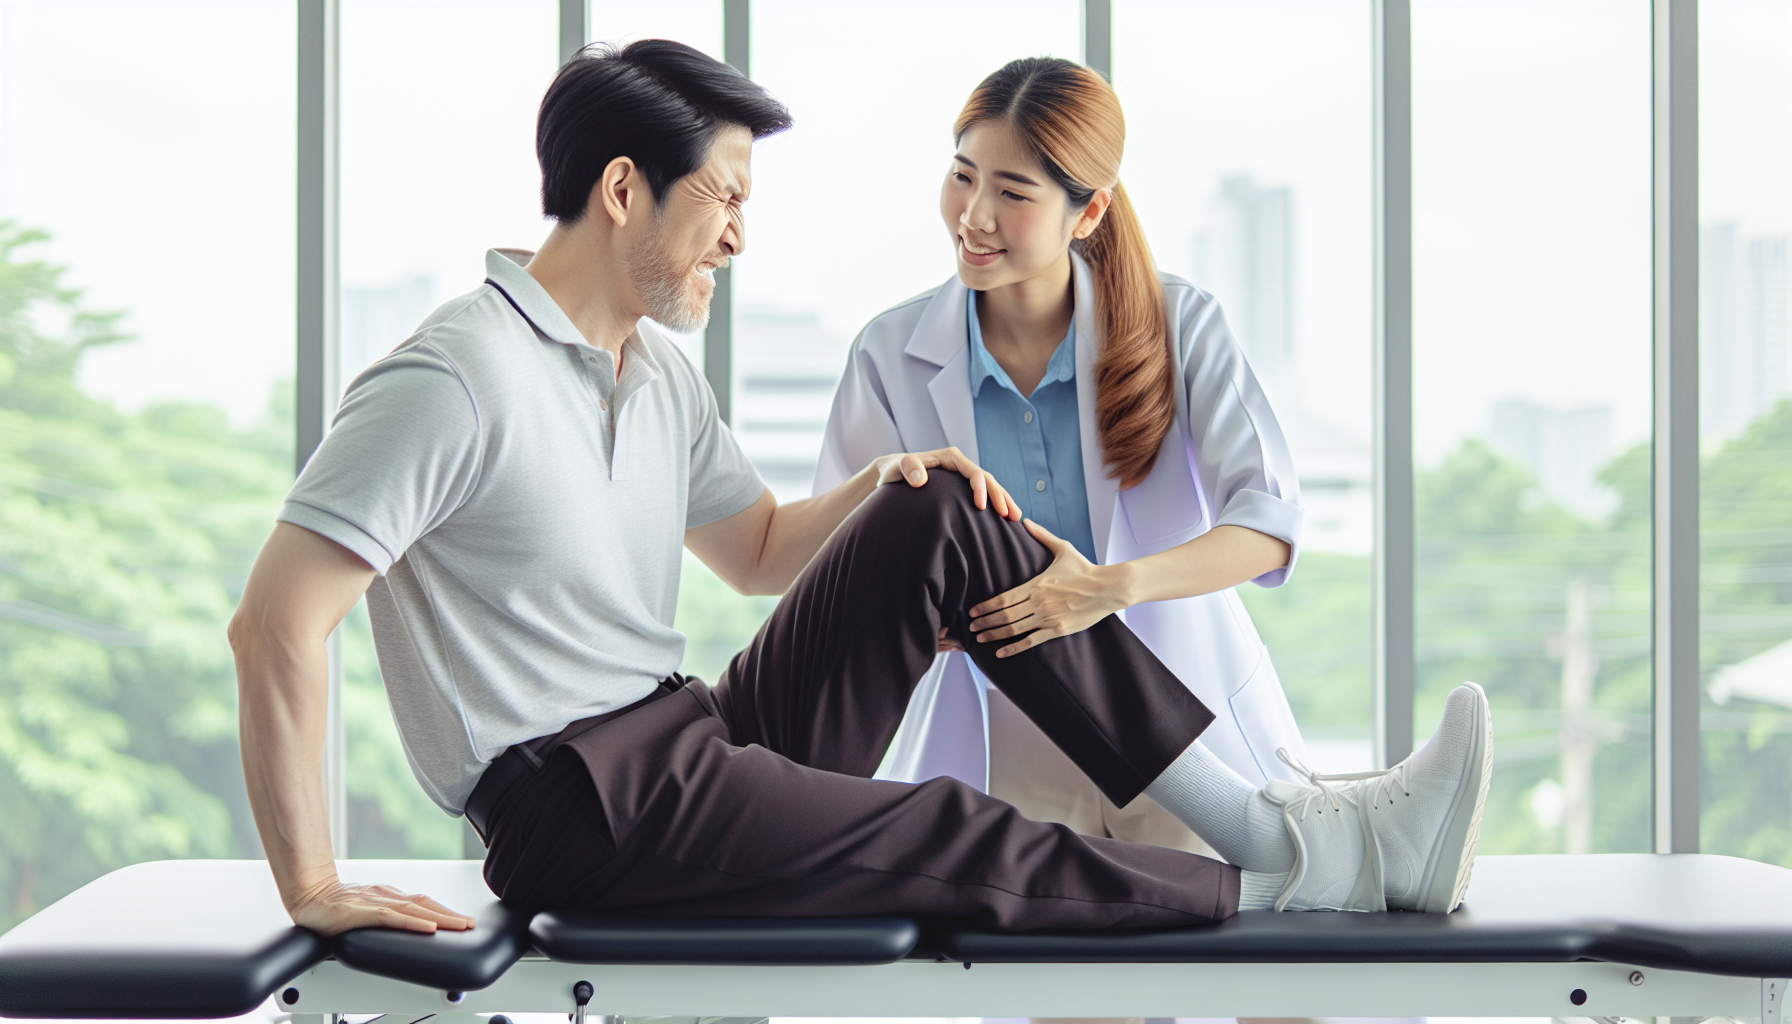 Physical therapist assisting a patient with sciatica exercises